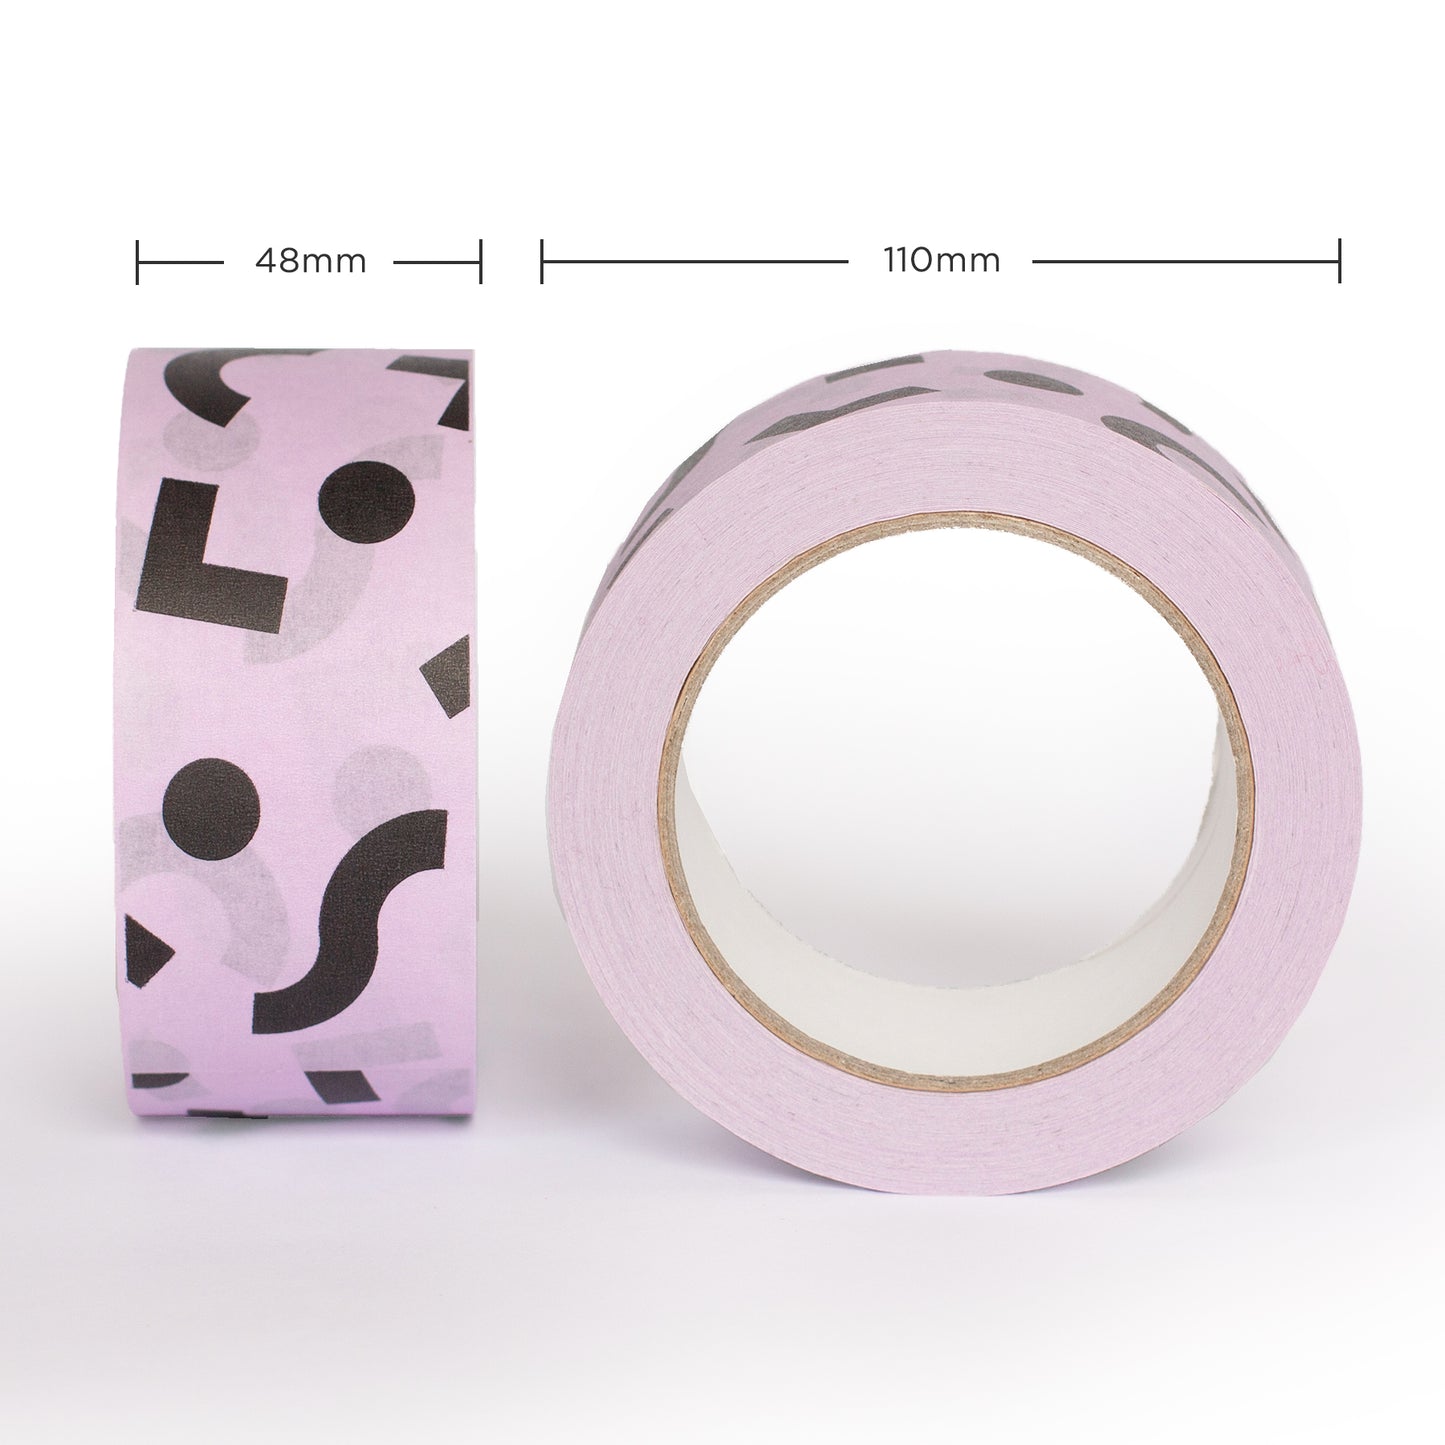 Decorative paper tapes, Shapes on Mauve print, 50 metres length, 48mm width